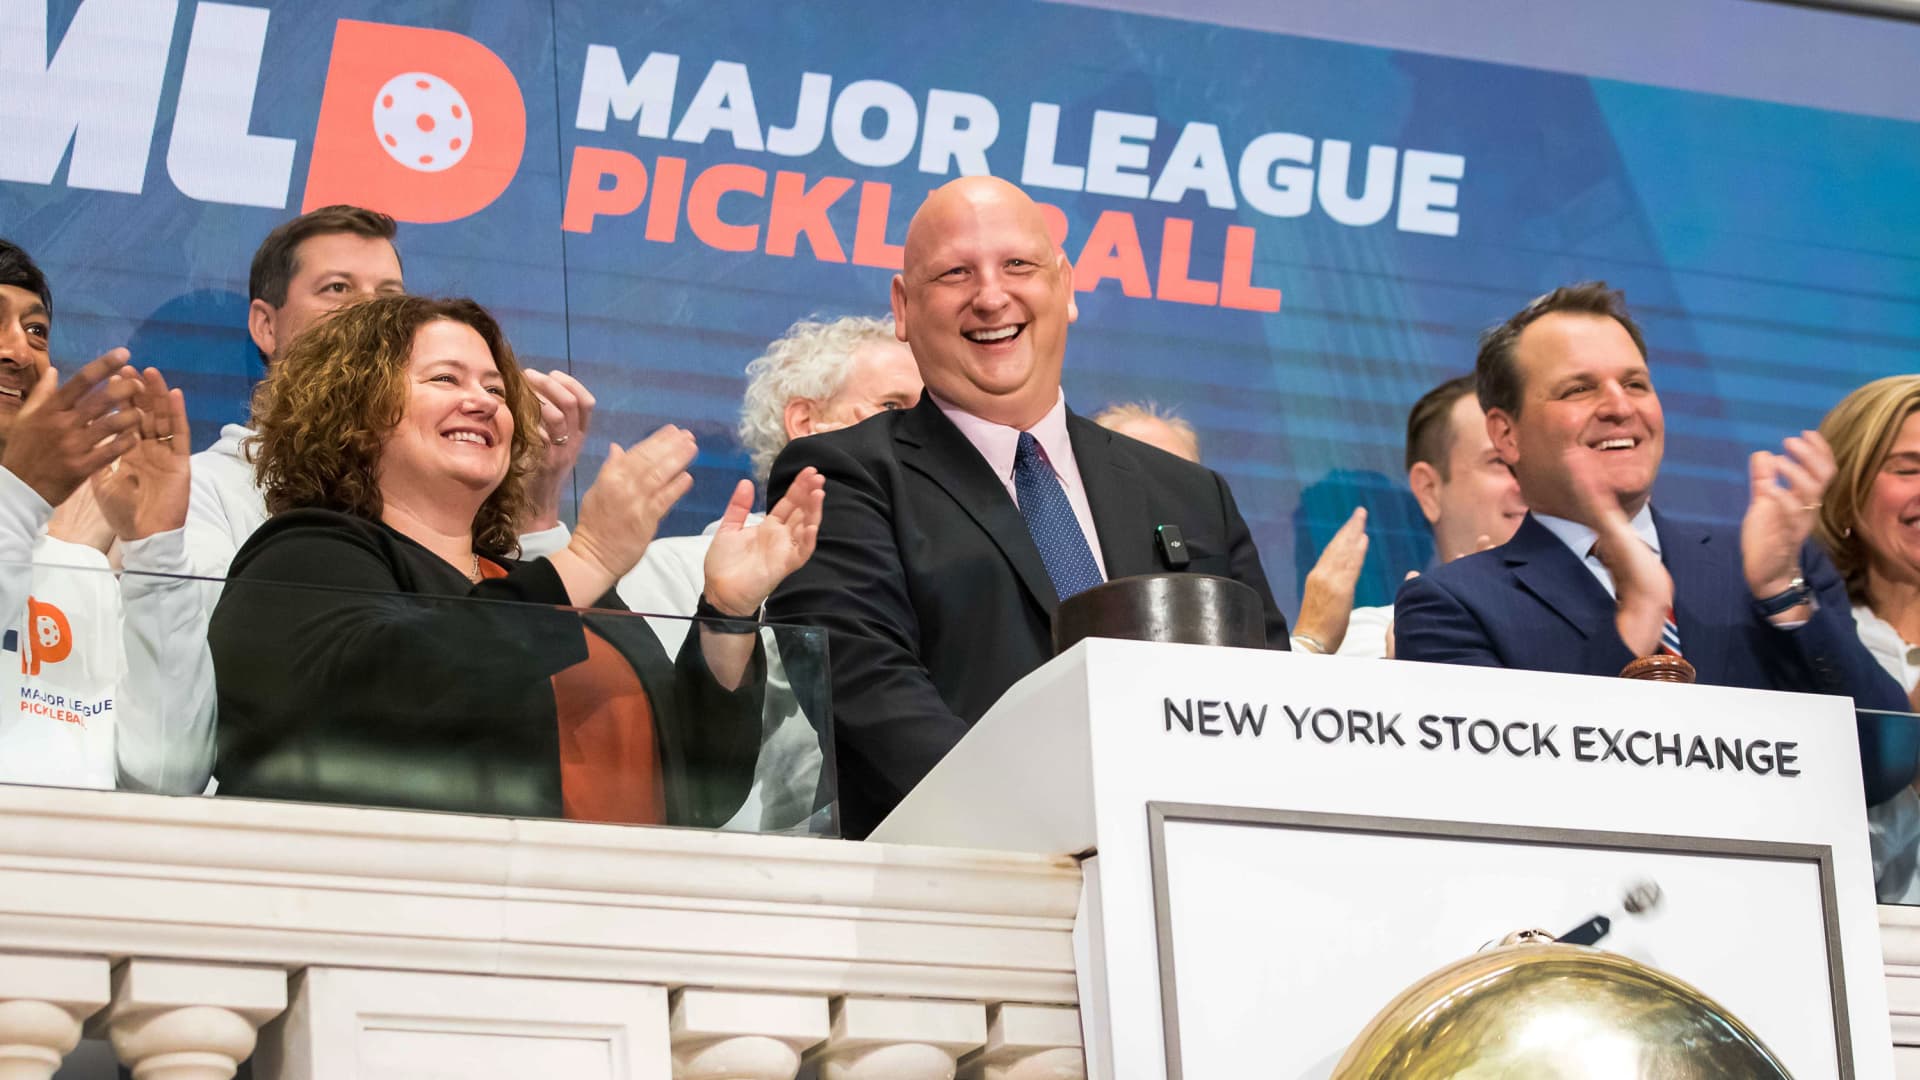 Major League Pickleball founder on growth, challenges